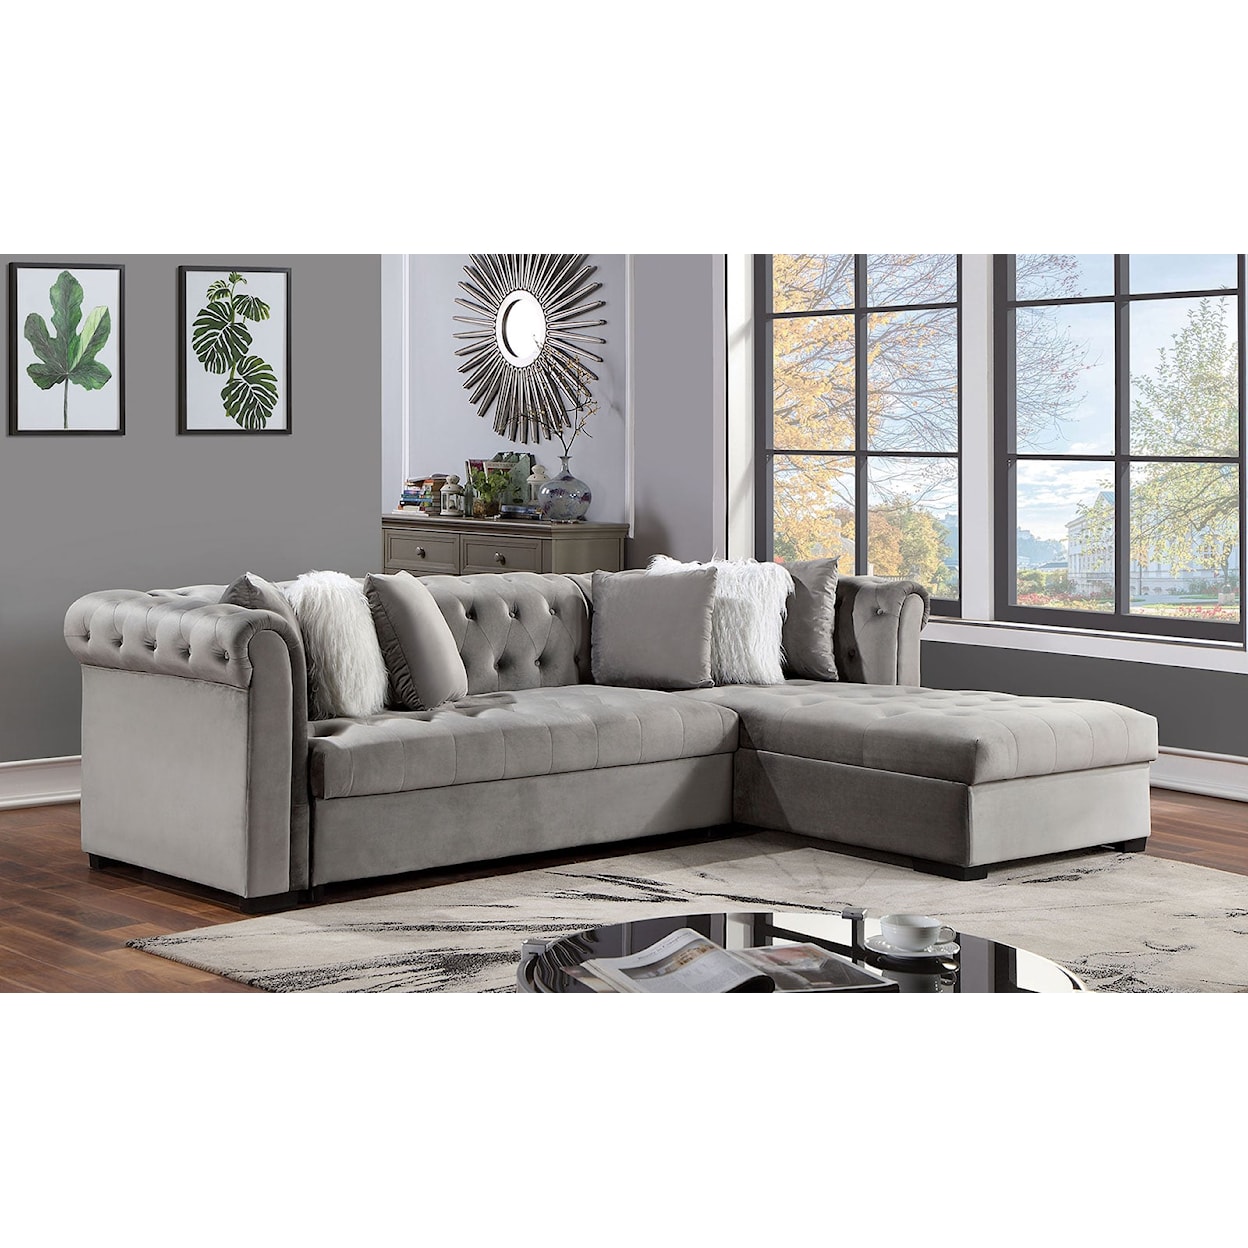 Furniture of America Alessandria Sectional, Gray